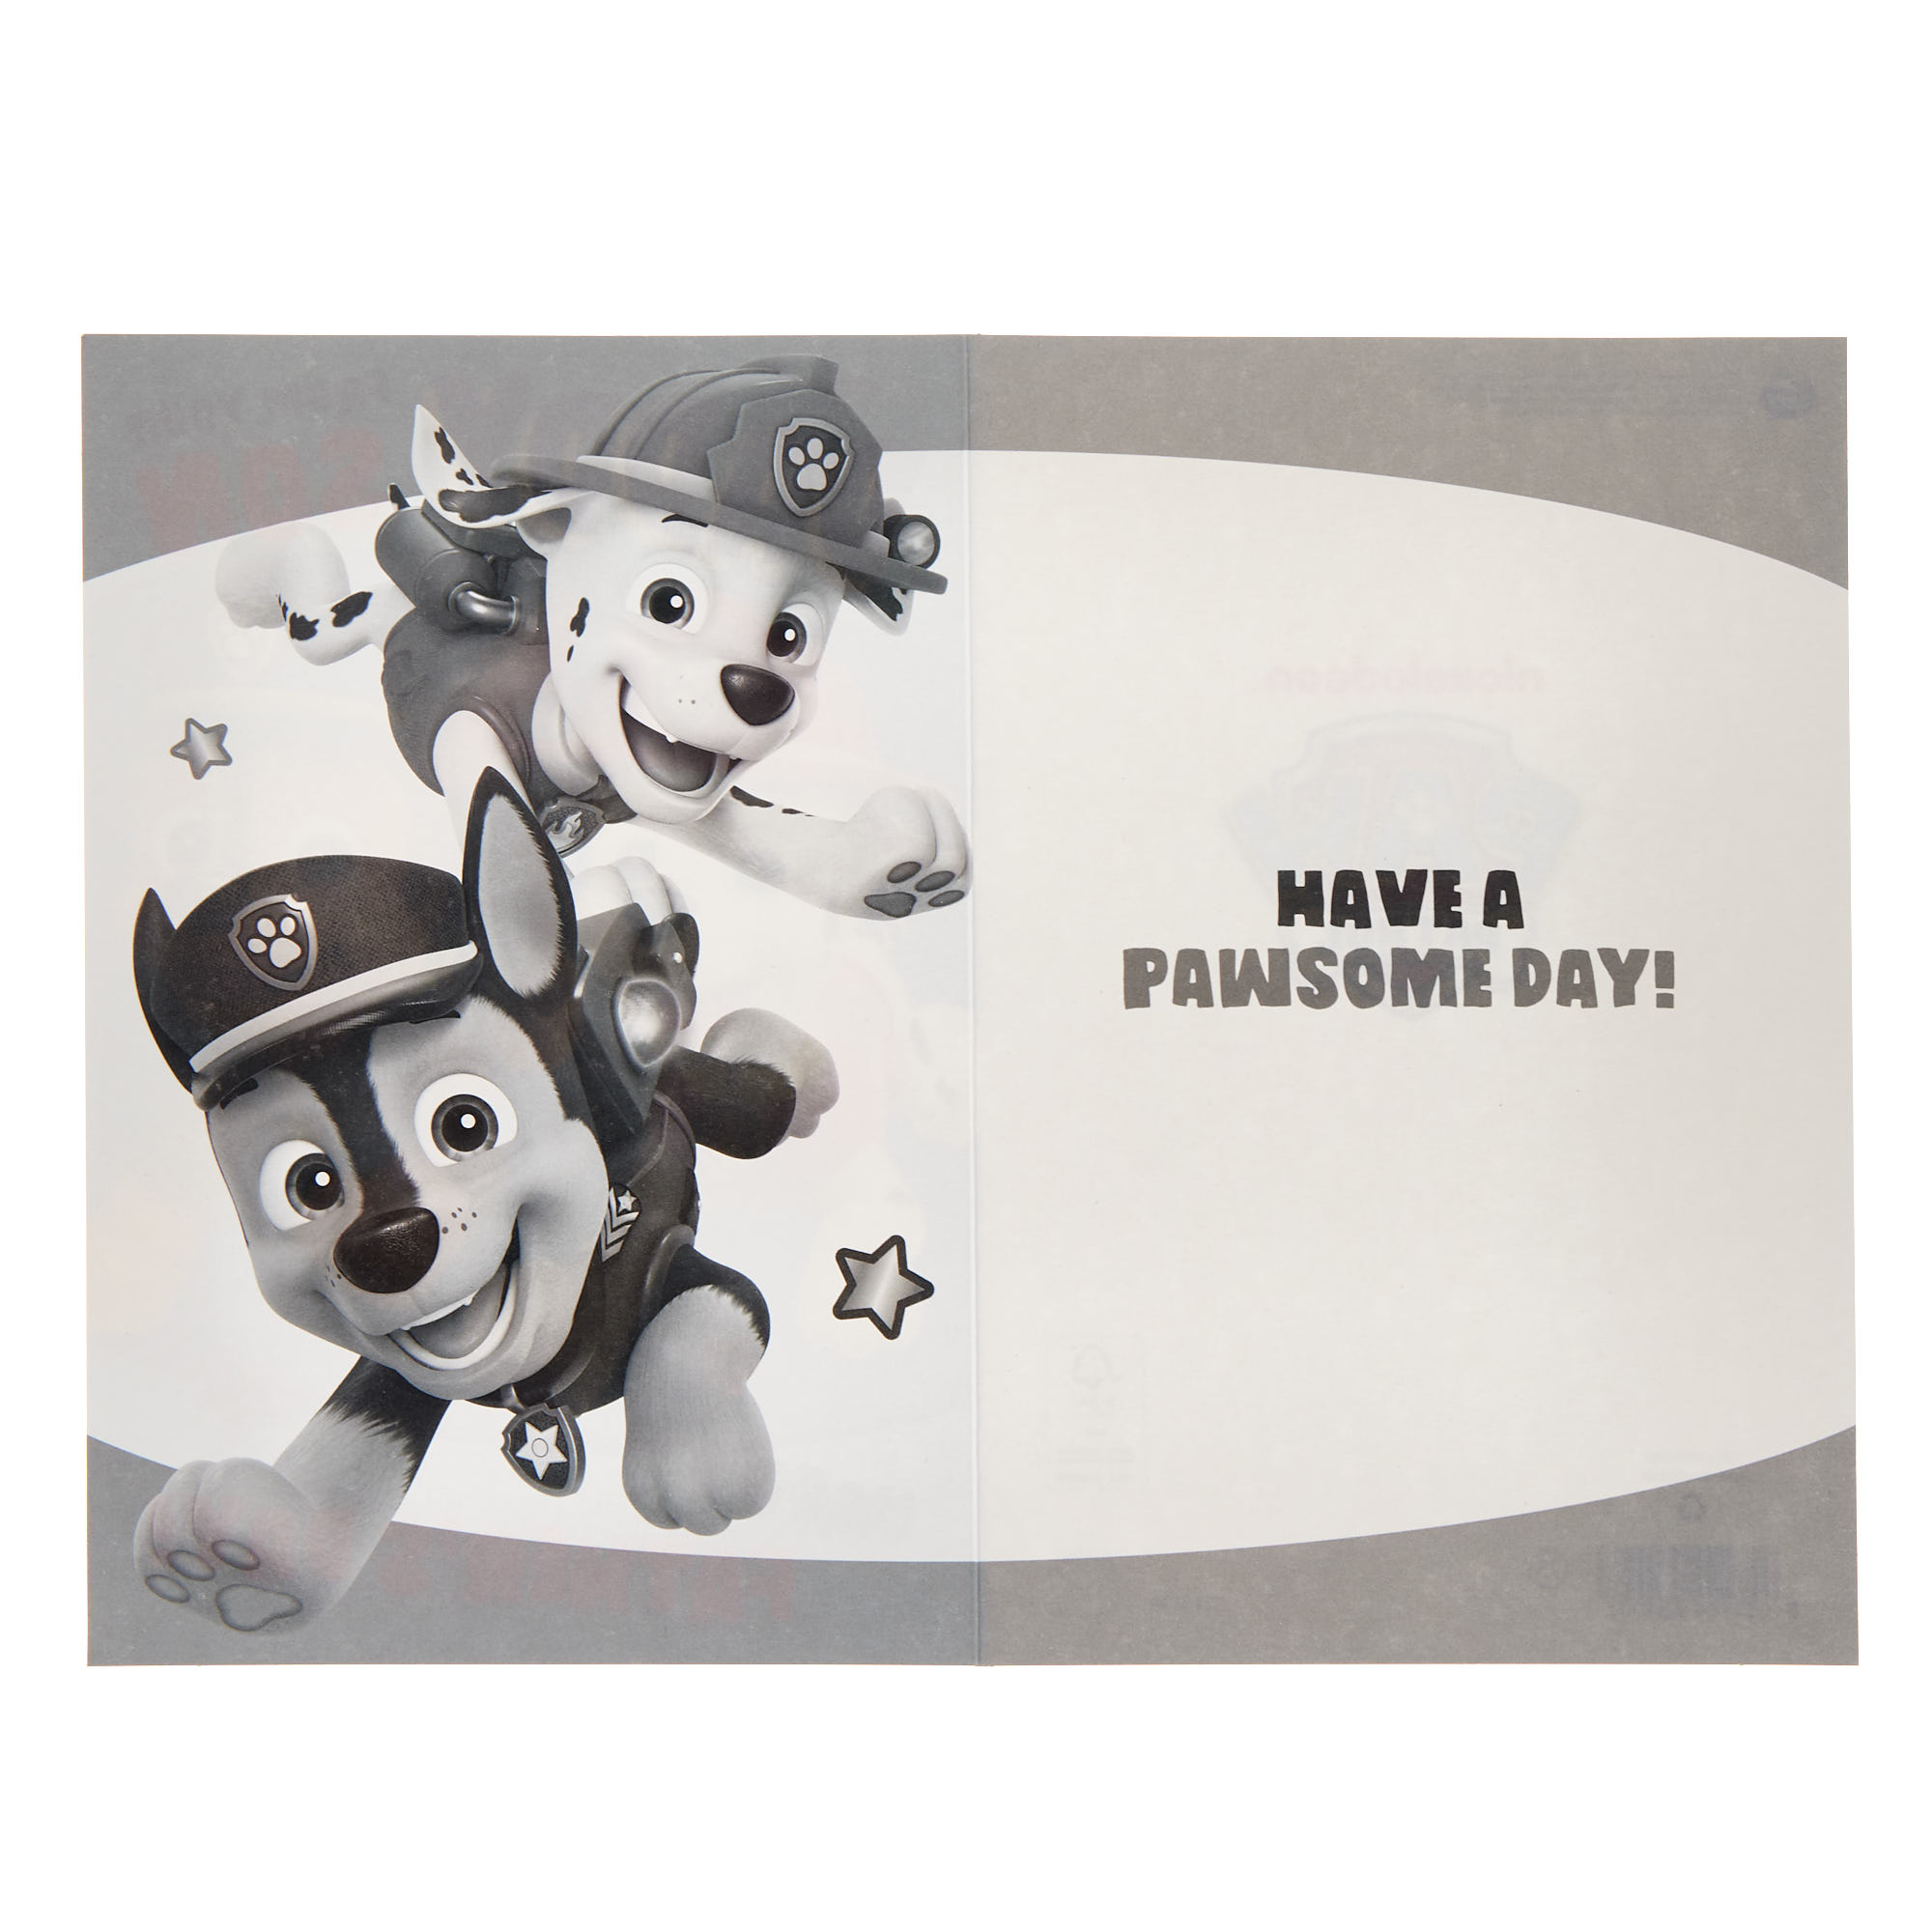 Daddy From Son Paw Patrol Father's Day Card